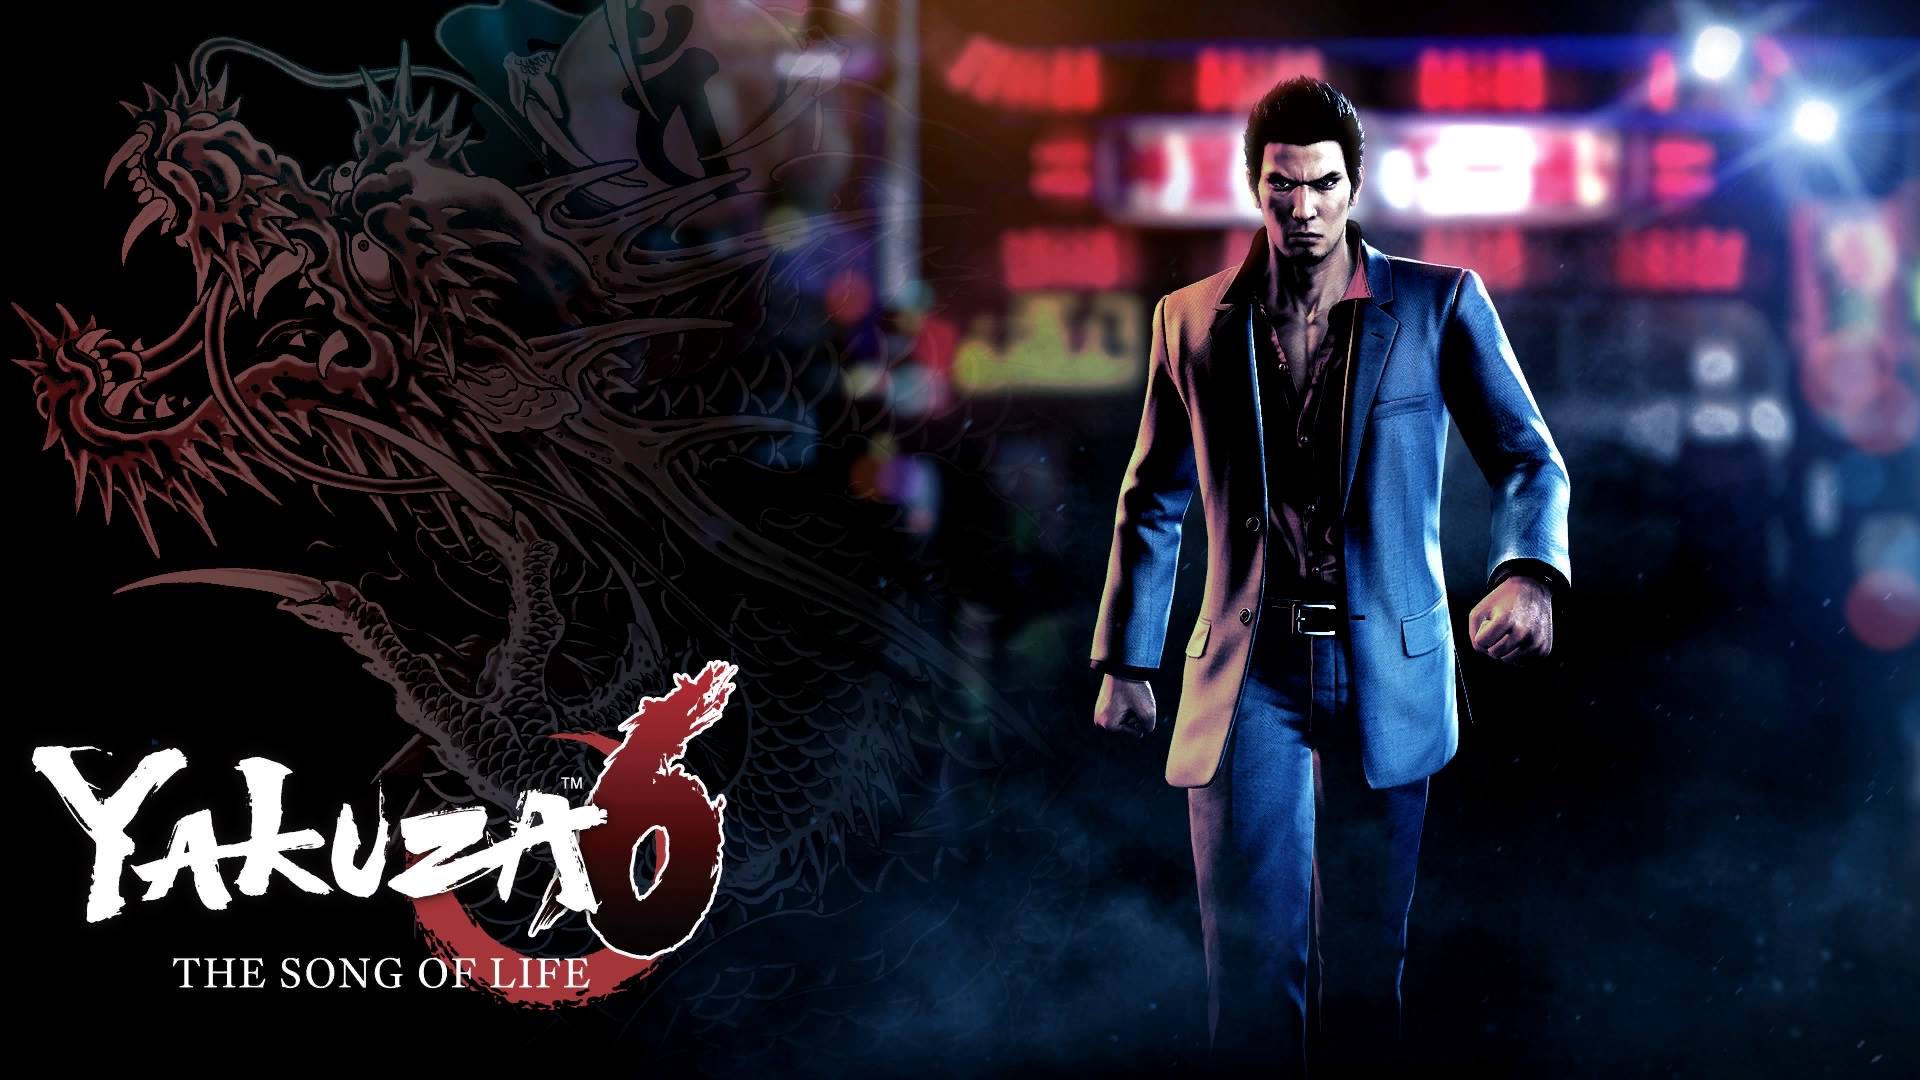 Test de Yakuza 6 : The Song of Life sur PlayStation 4 - Blogue Best Buy